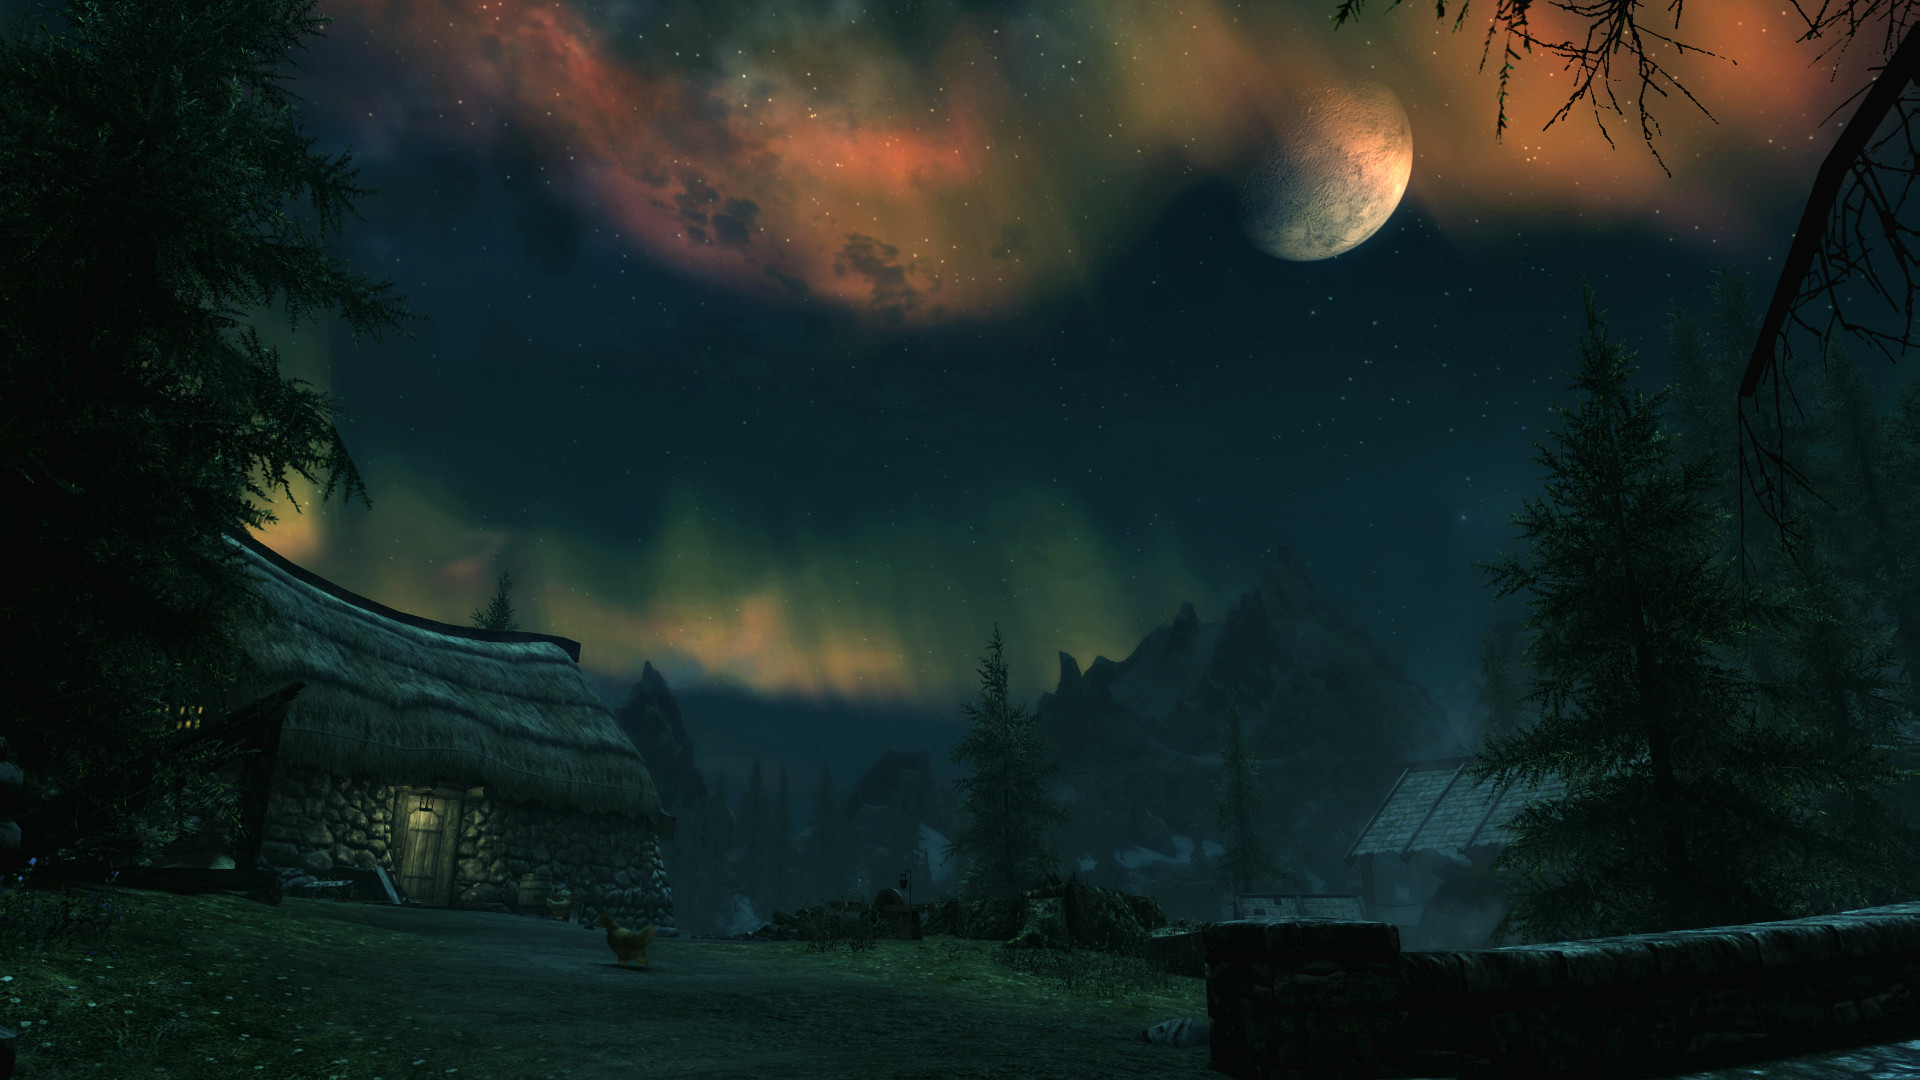 If I could play the DuckTales - Moon Theme I would #games #Skyrim.